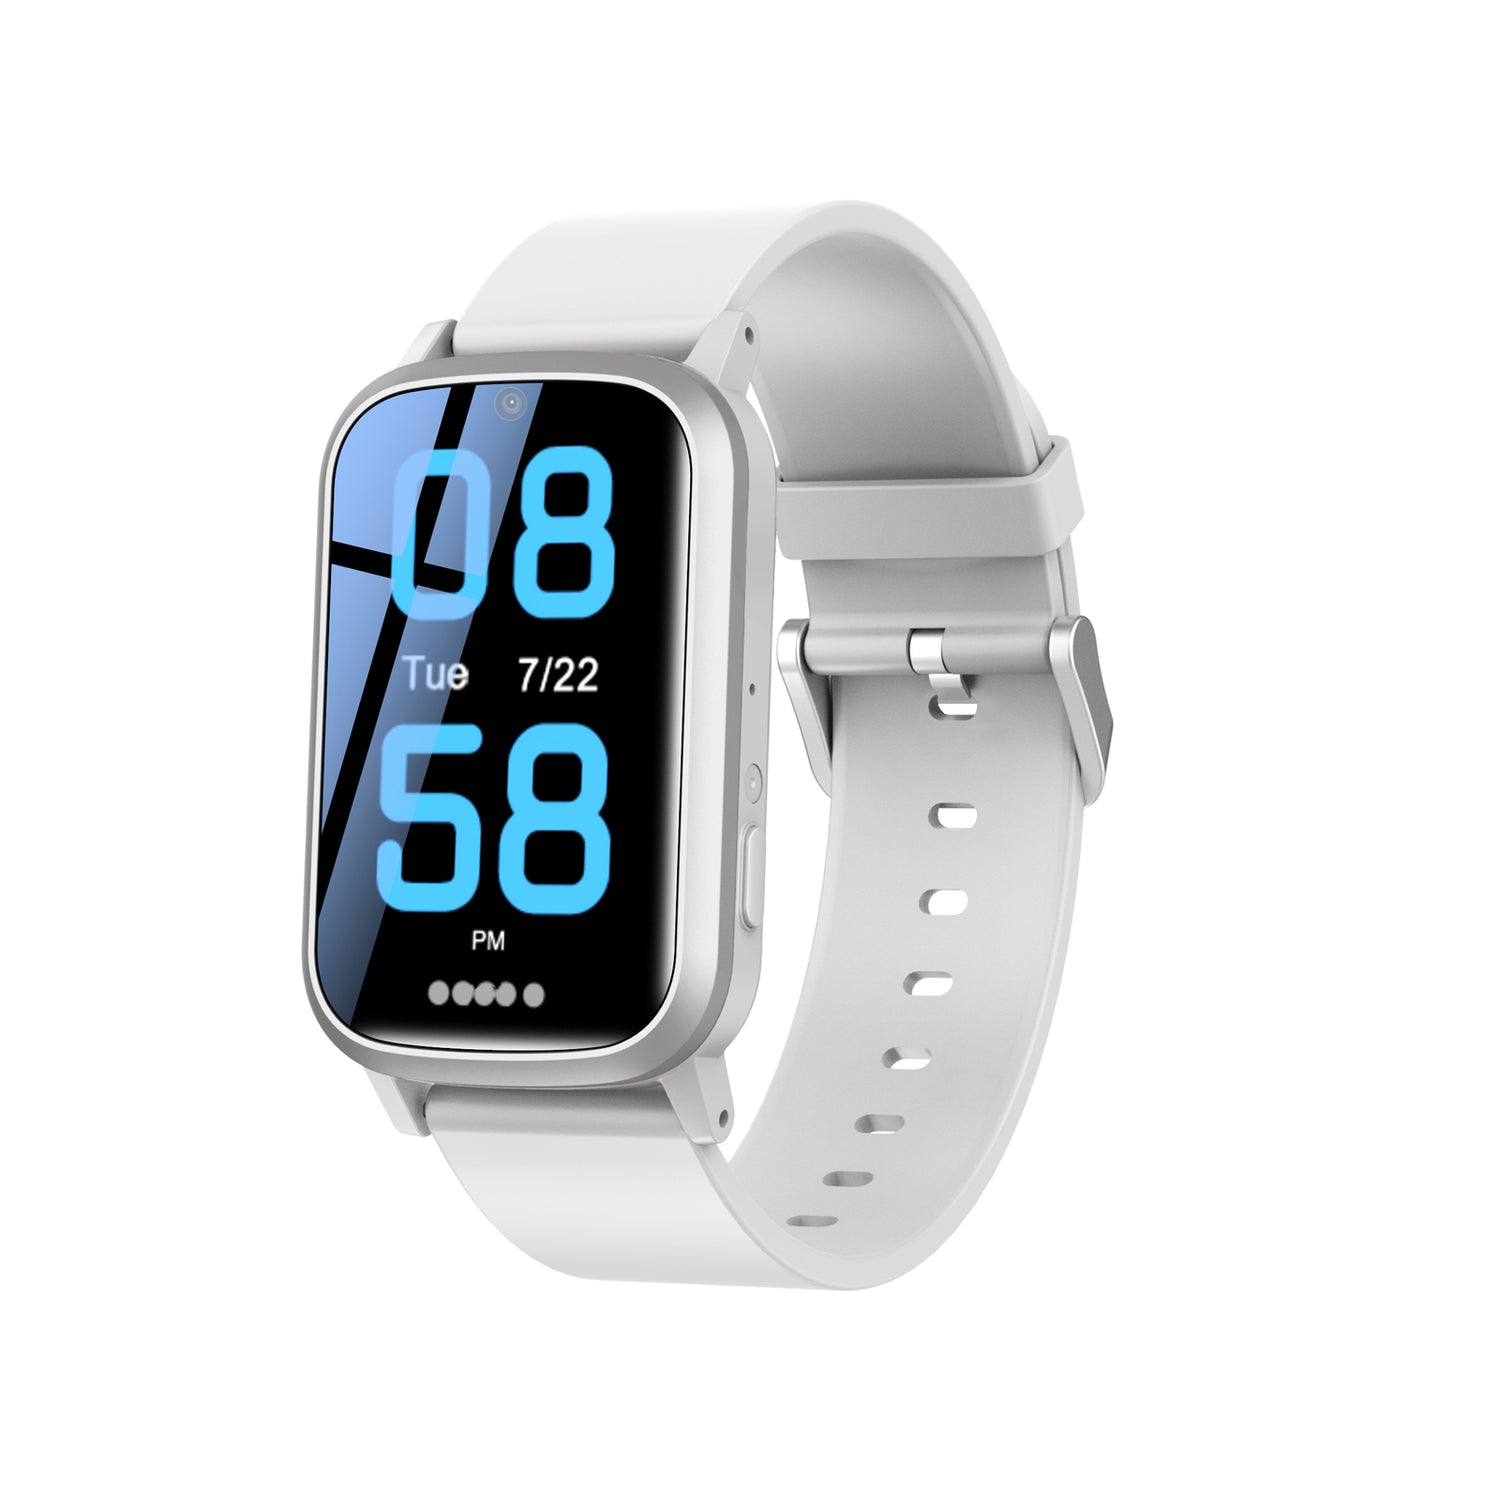 GPS tracker watch with white band and blue digital display